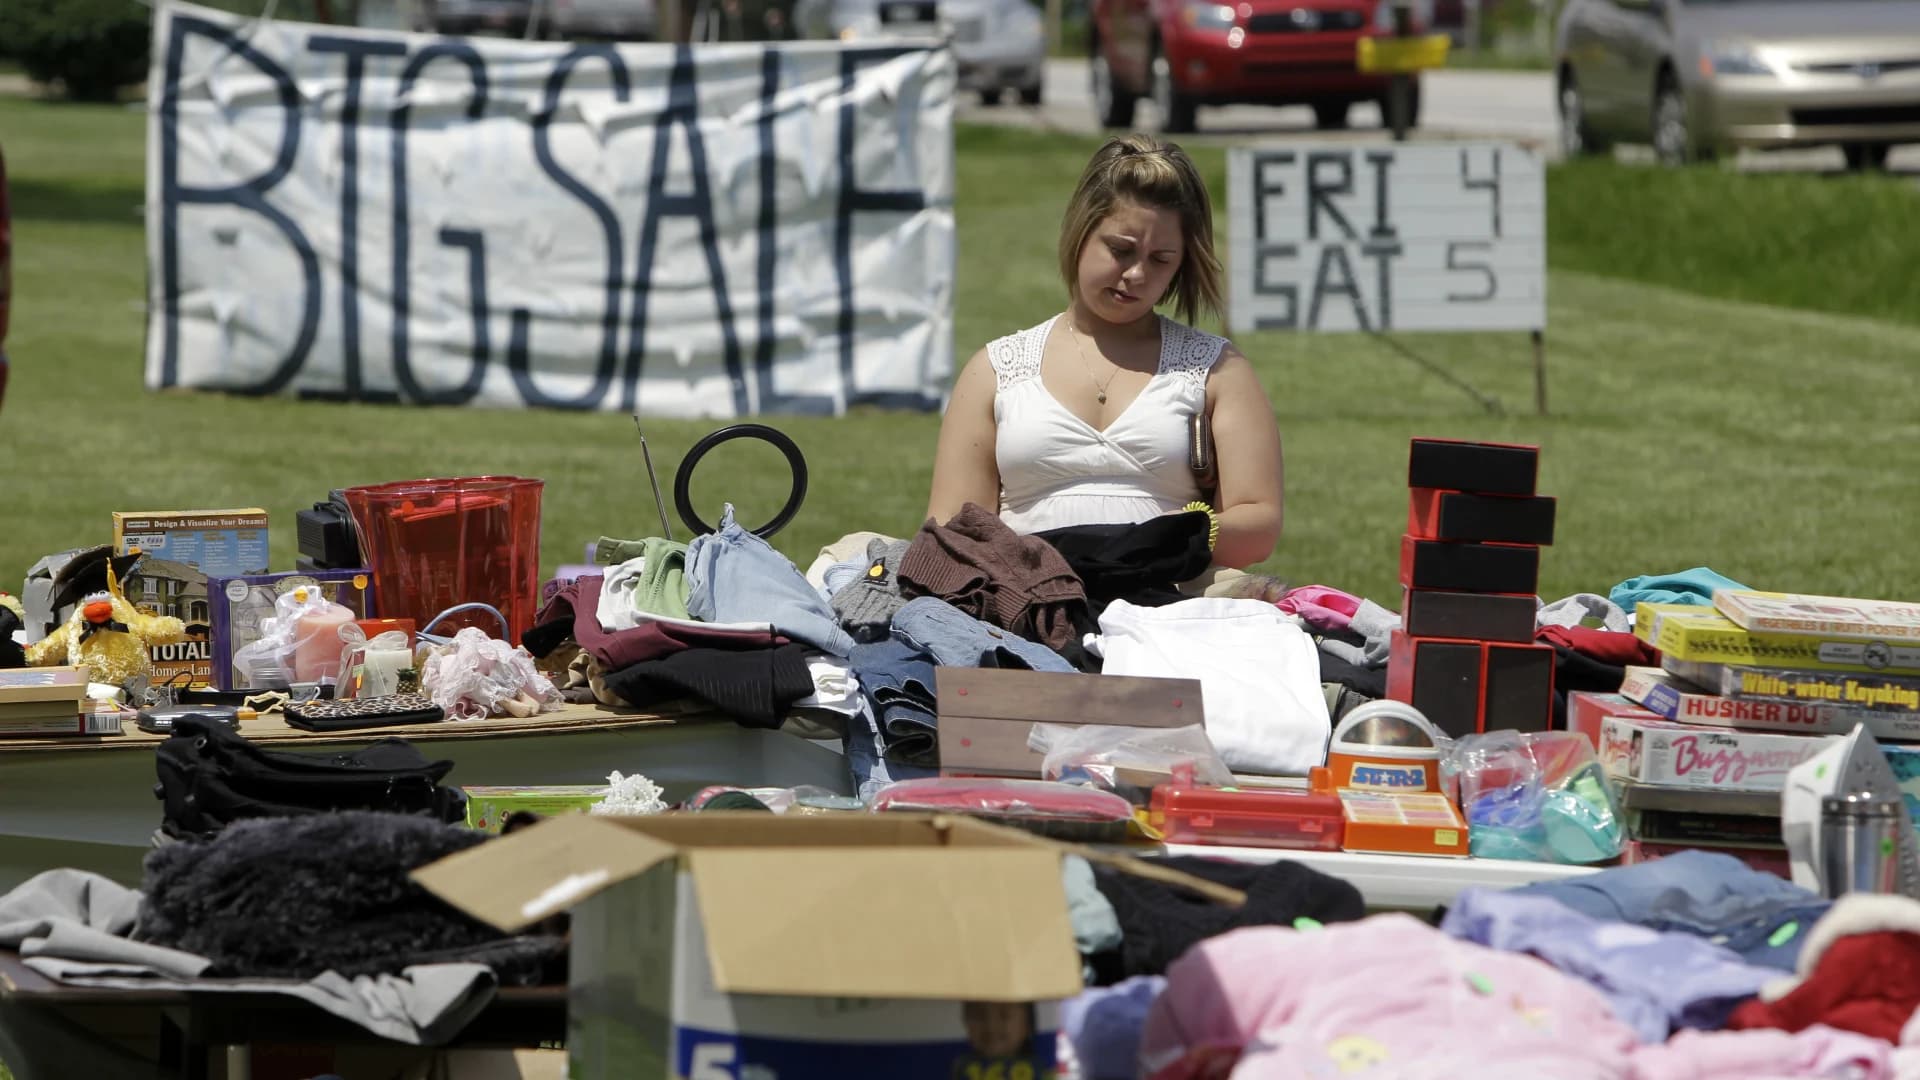 Liz Weston: How to make more green at your next yard sale